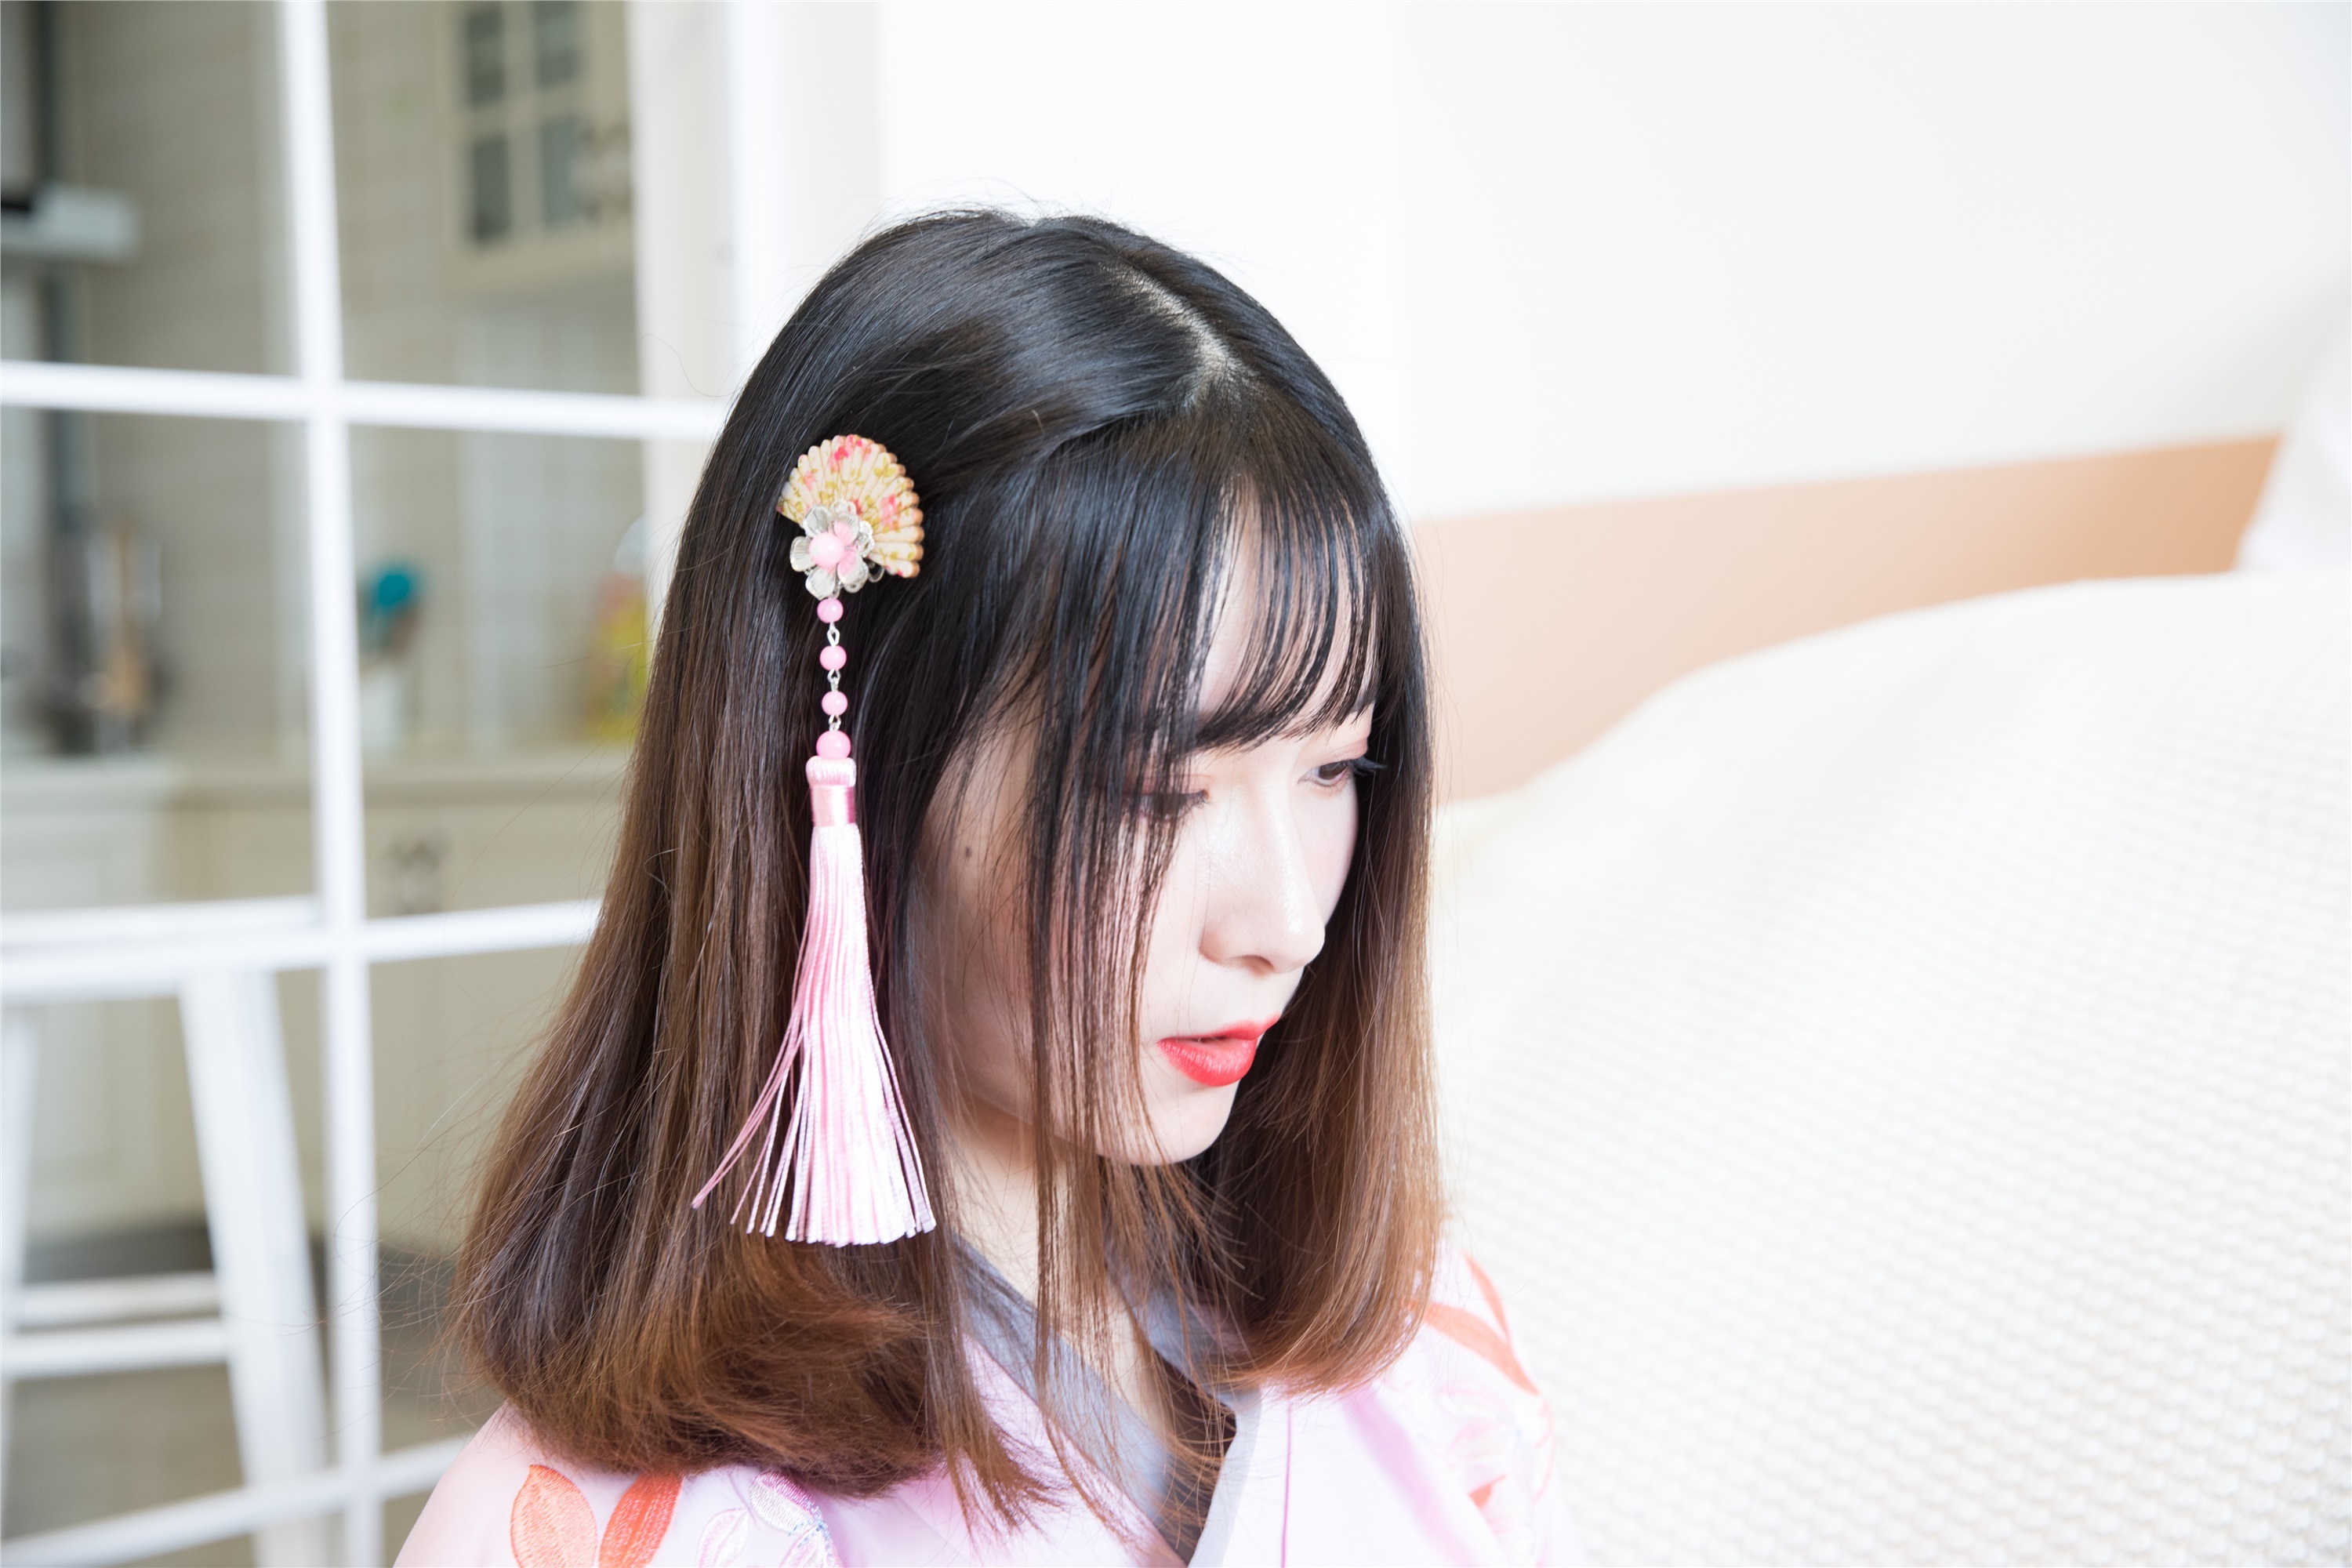 Material love media No.109 cat's ear - the ingenious combination of Xiaozhong Hanfu and shredded meat